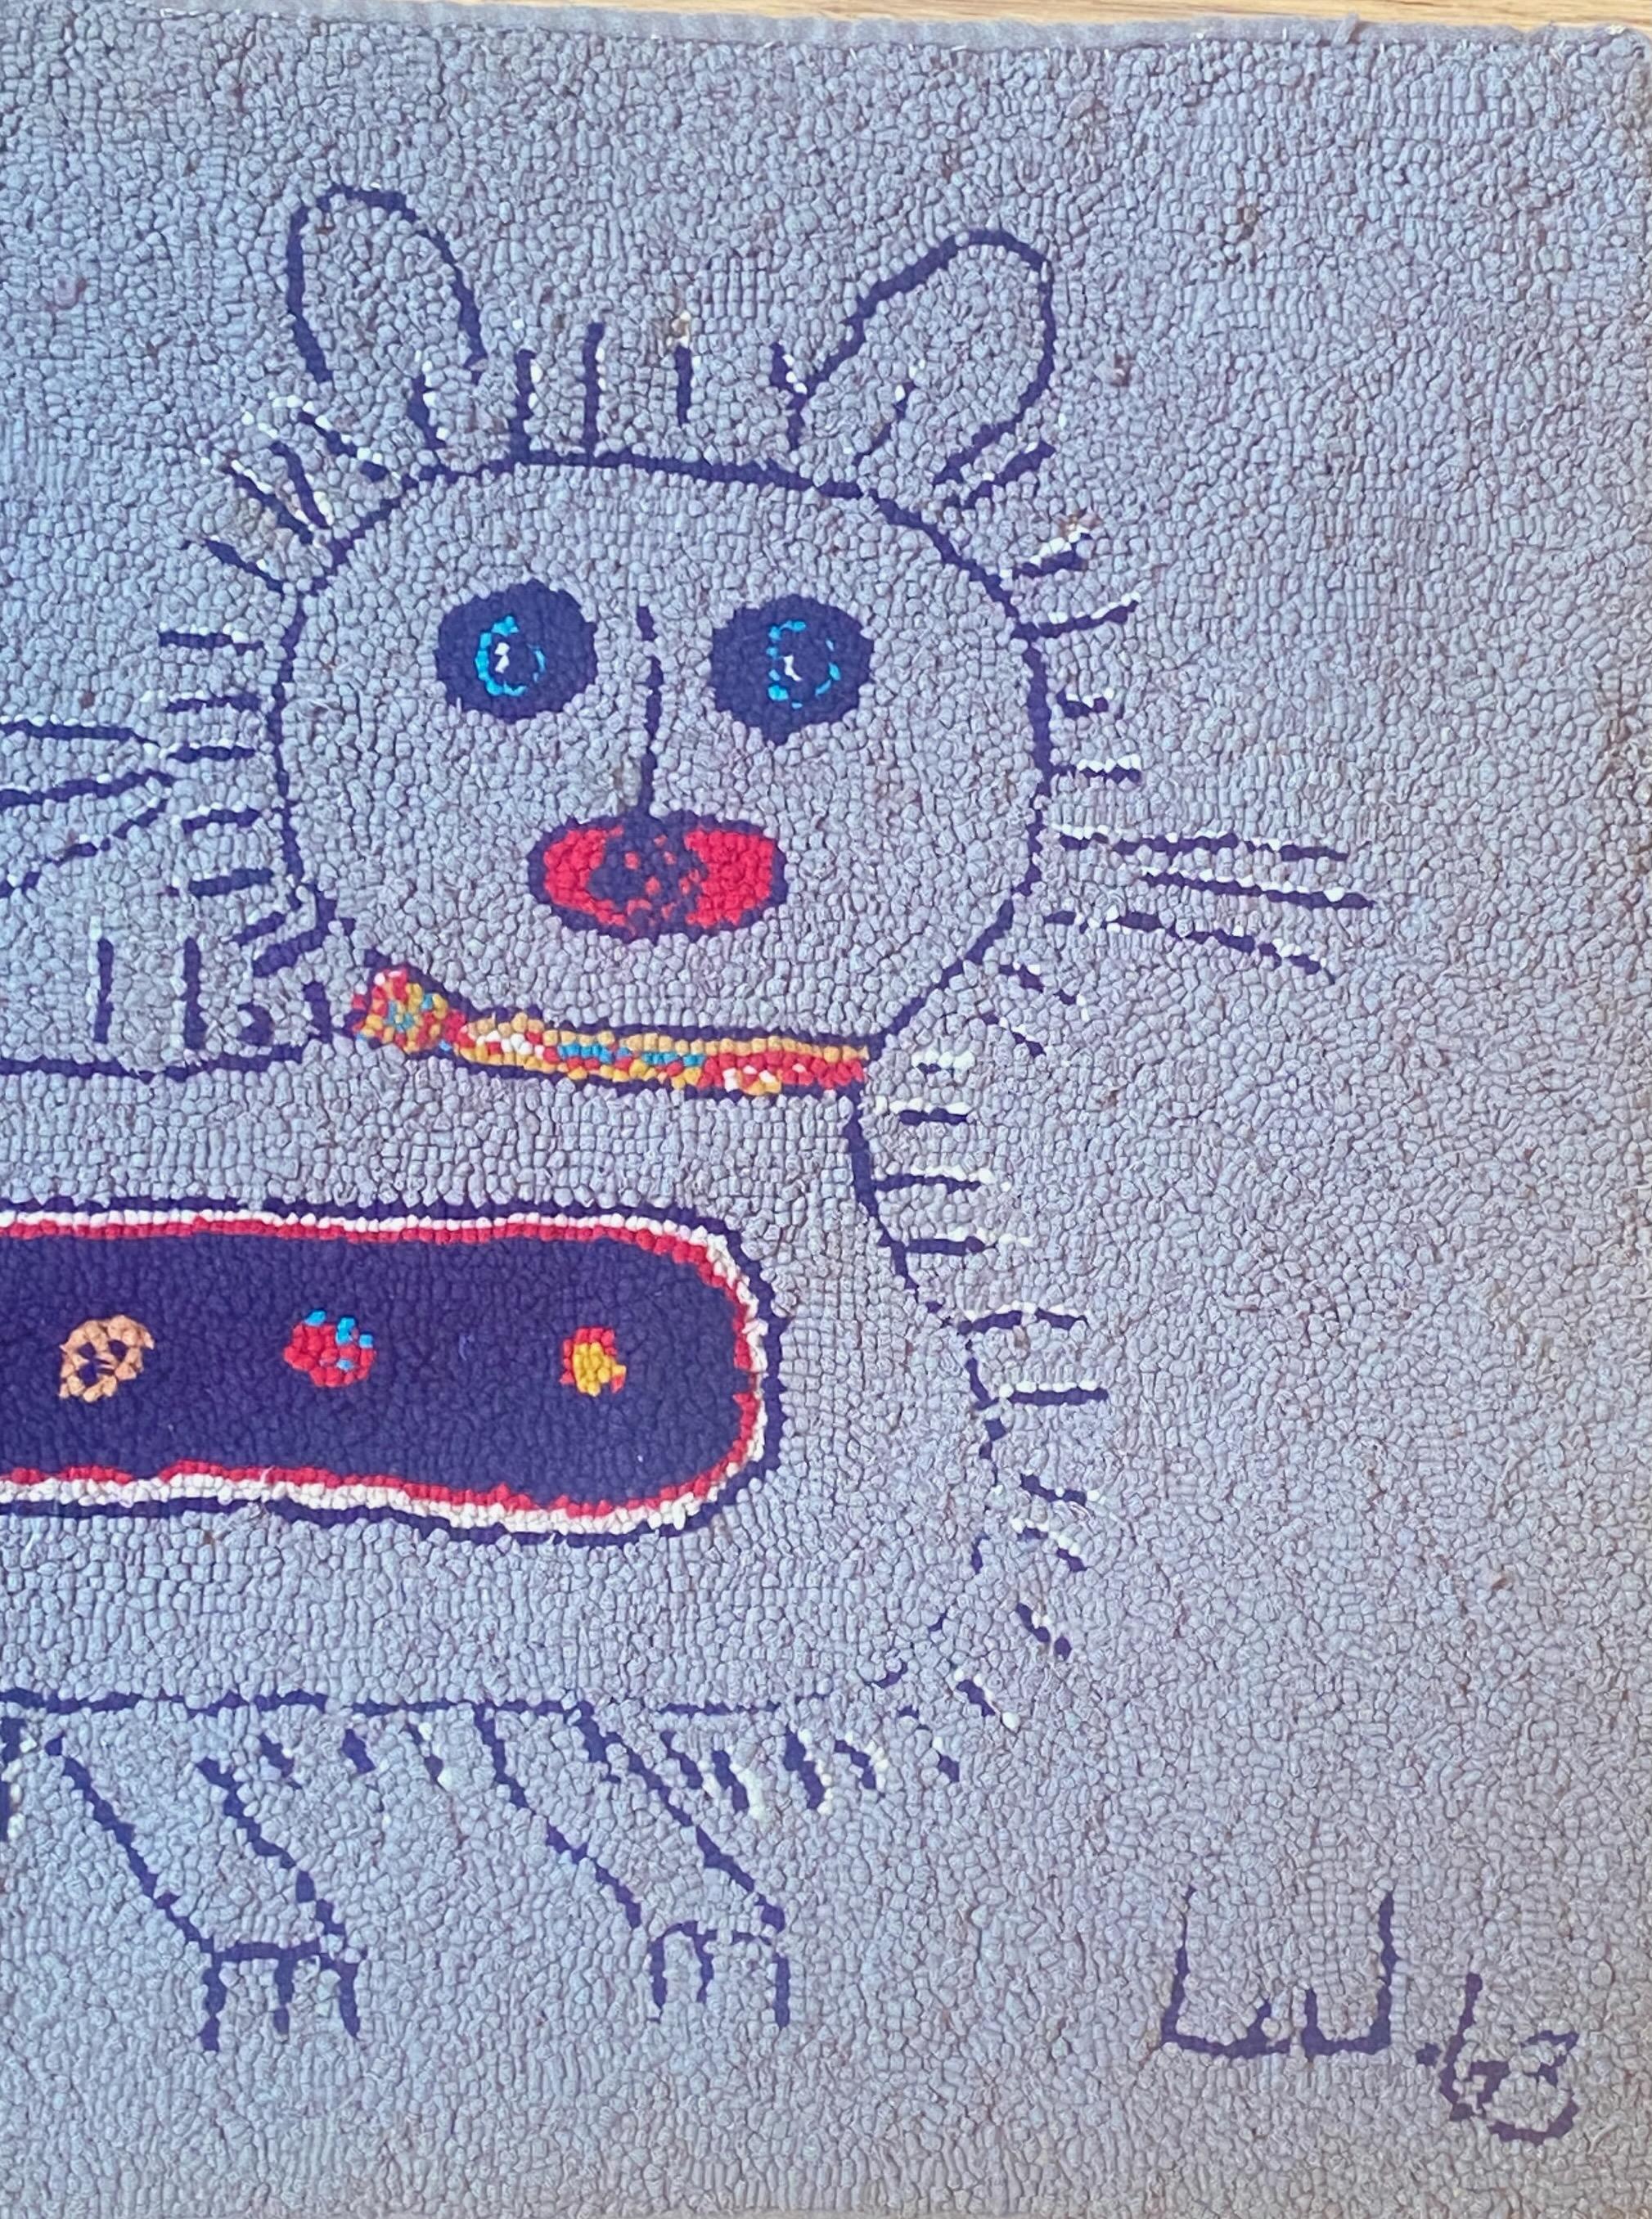 Modernist Mid Century American Folk Art Hooked Rug of a Cat dated 1963 In Good Condition For Sale In San Francisco, CA